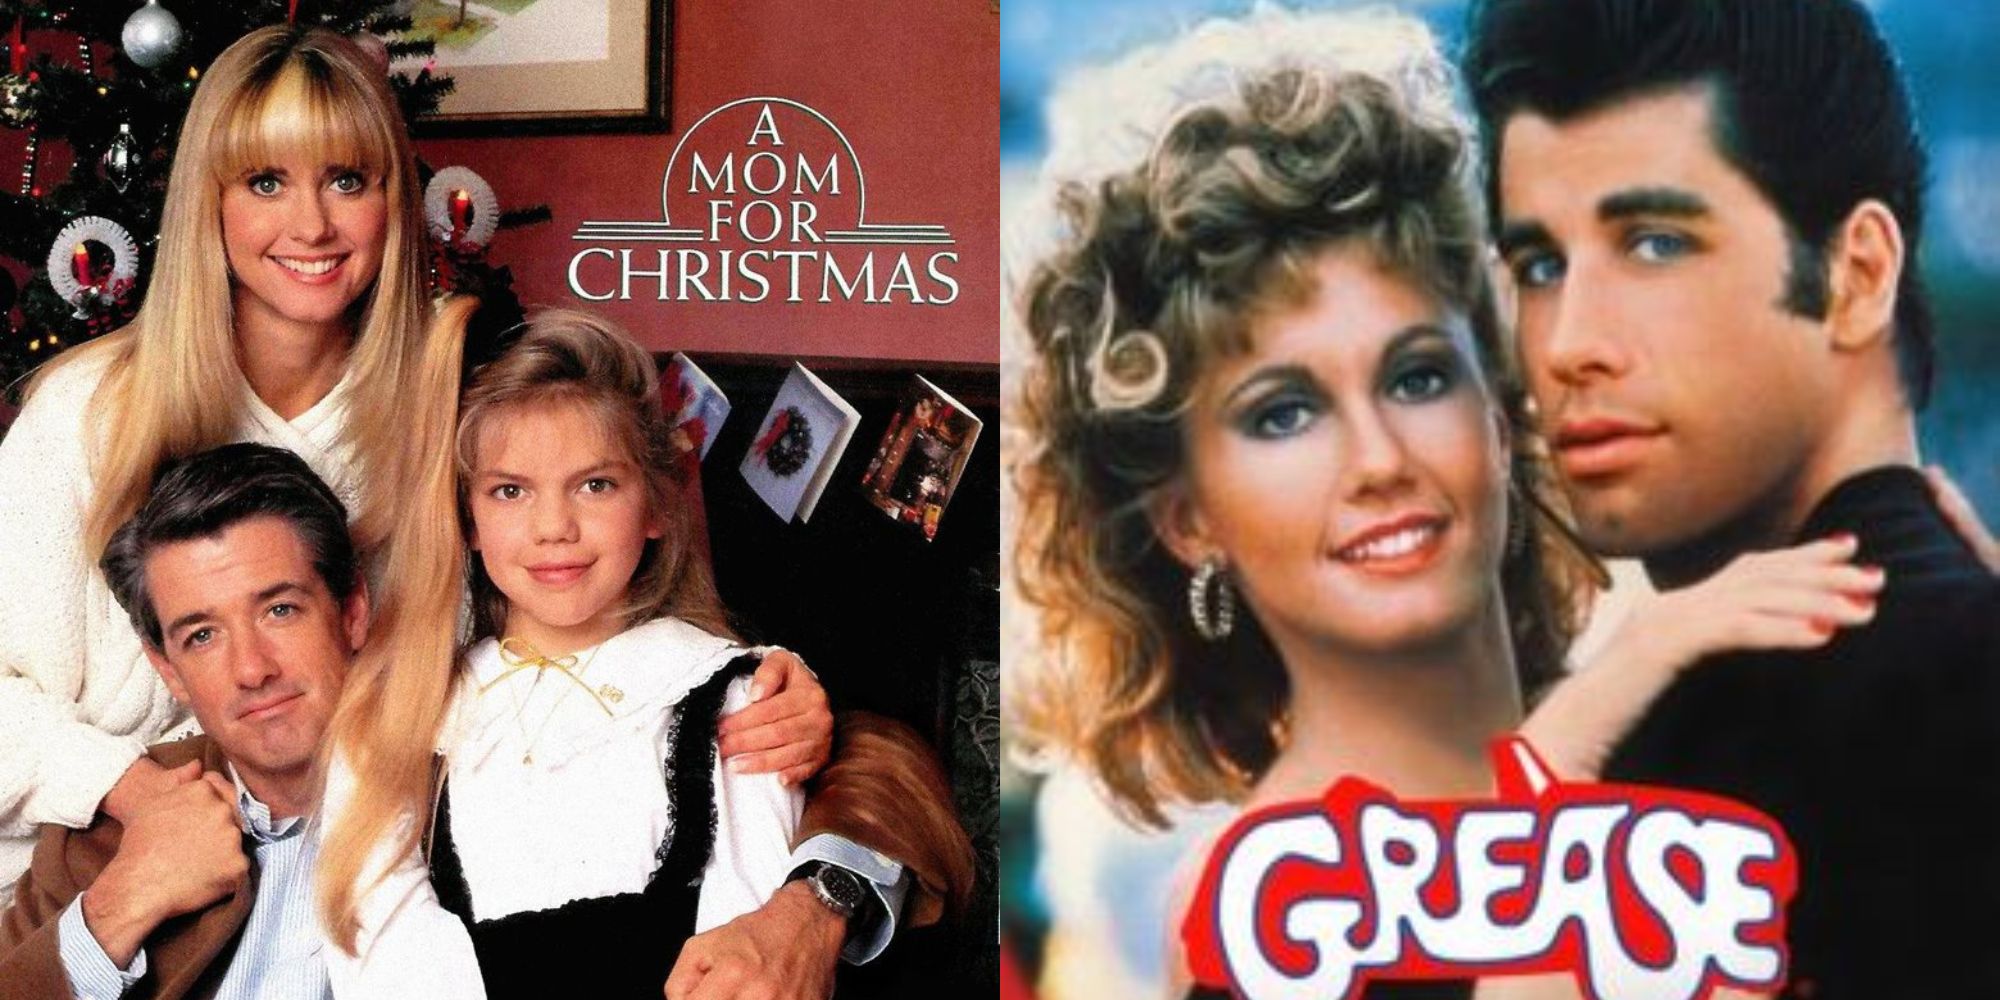 Split image showing posters for A Mon for Christmas and Grease.